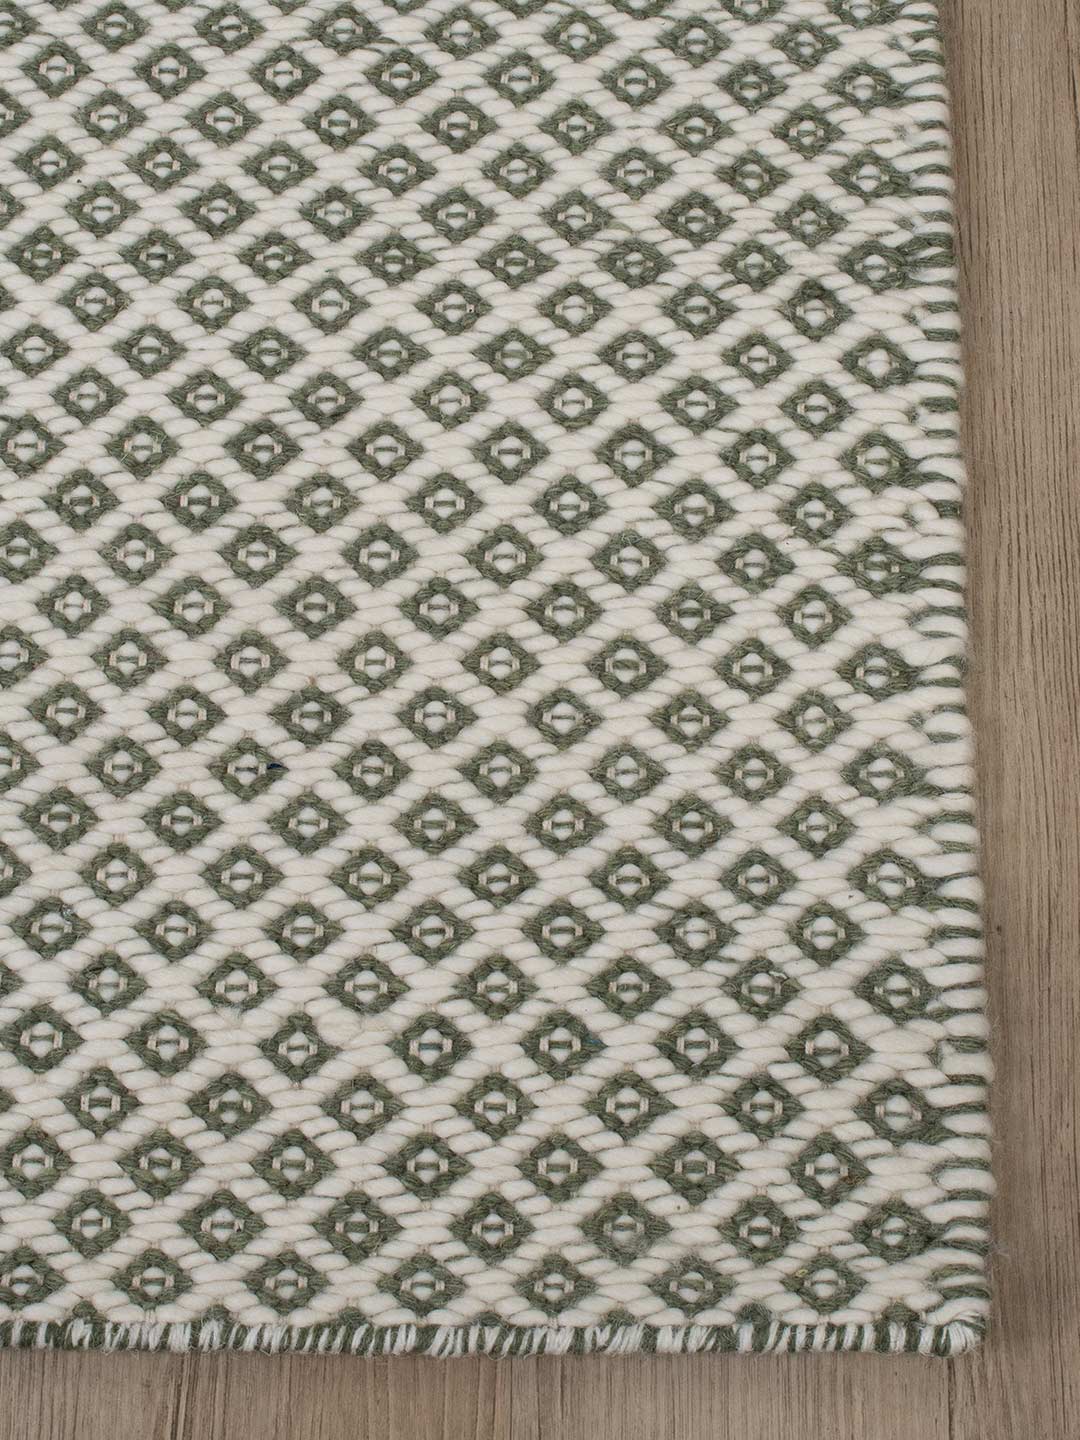 Rubick Green Ivory Rug 20% off from the Rug Collection Stockist Make Your House A Home, Furniture Store Bendigo. Free Australia Wide Delivery